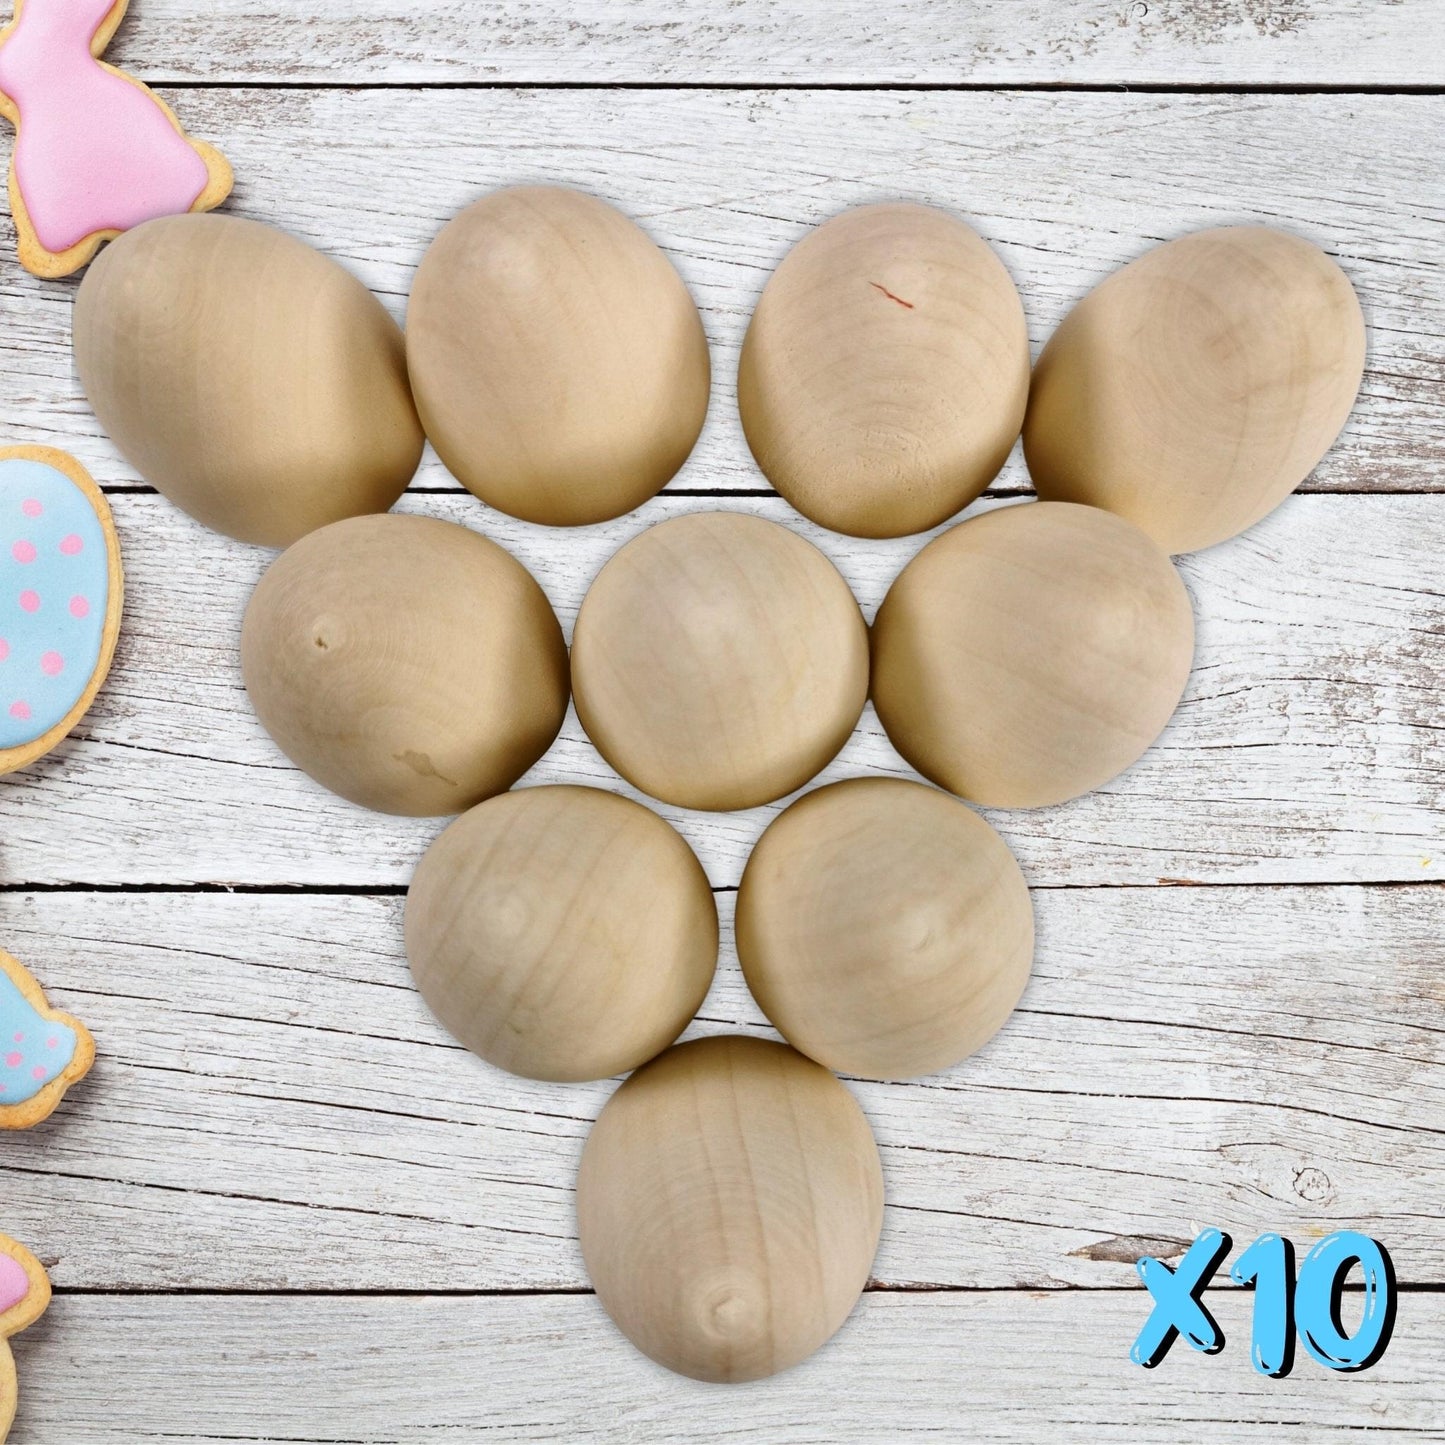 10 Wooden Eggs, Personalise & Paint Easter Eggs 5.5cm x 3.5cm Easter Egg Crafts